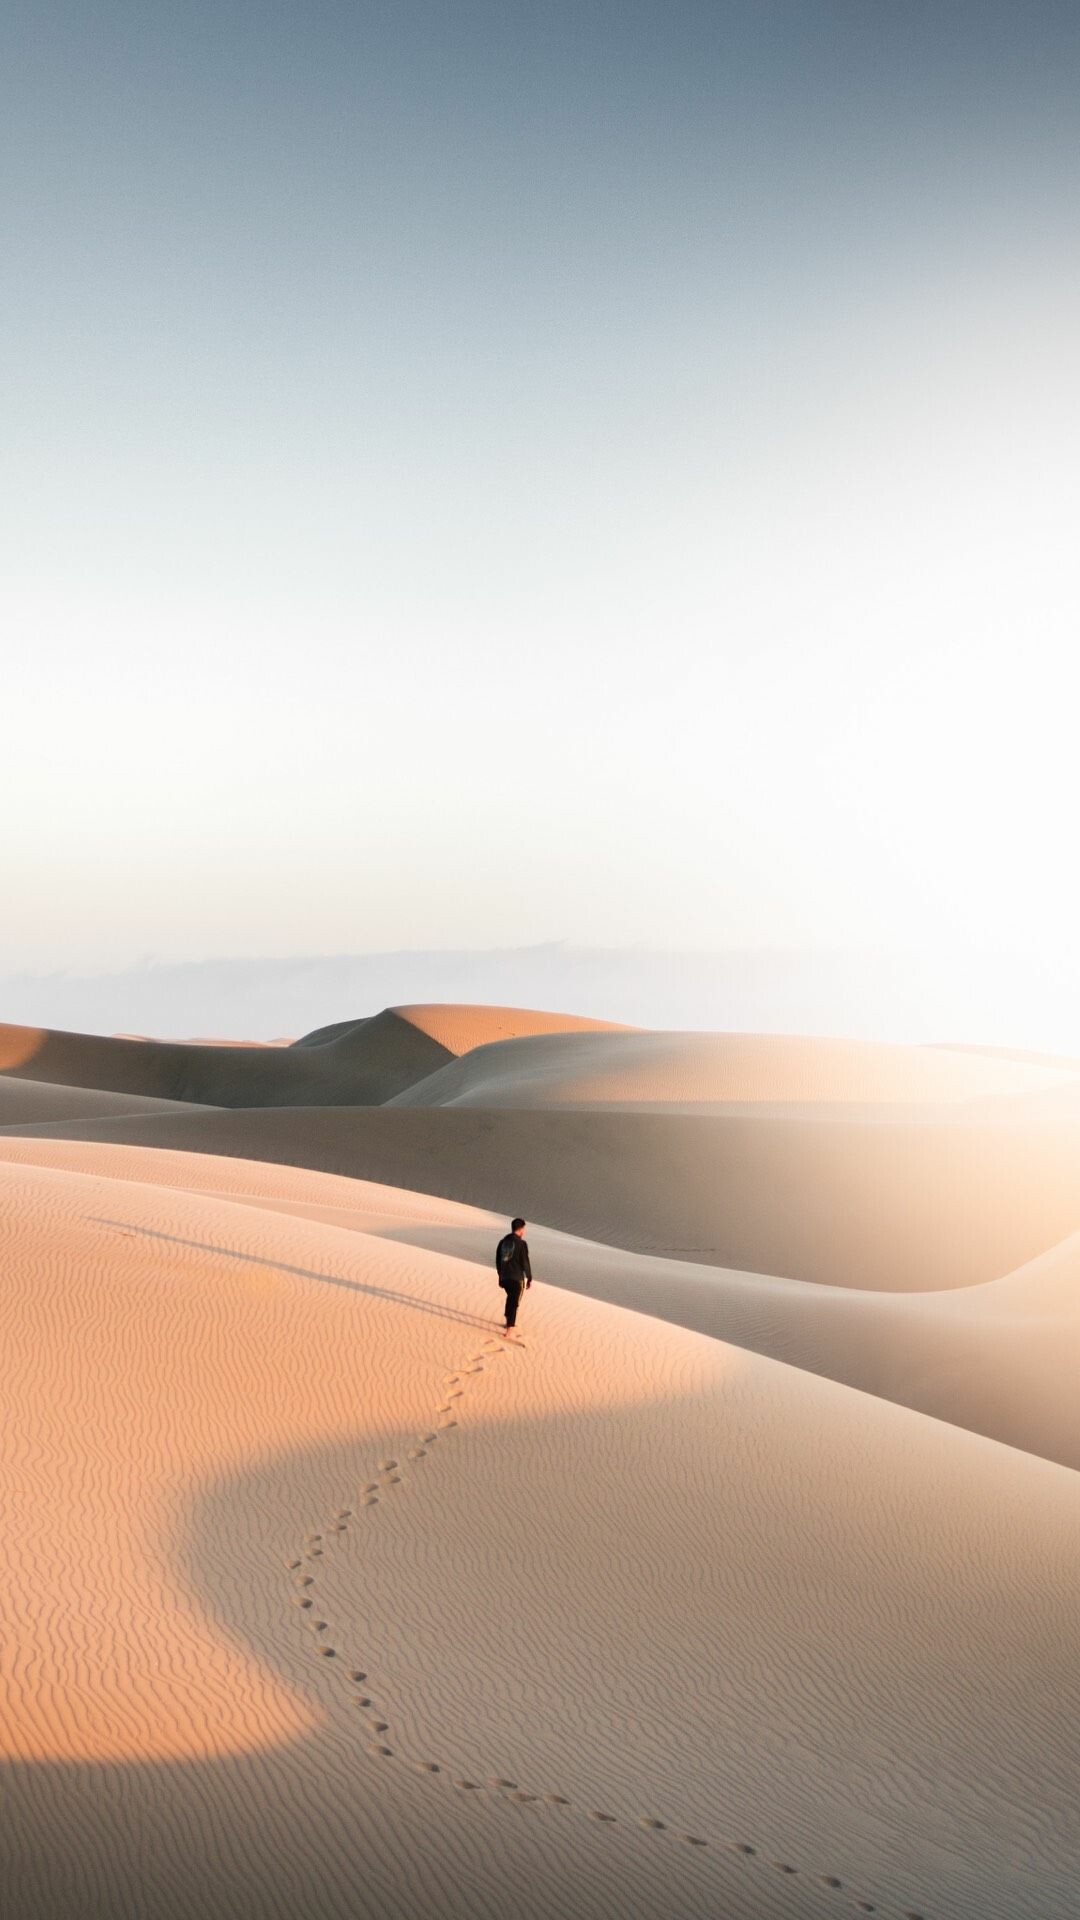 Desert: In some deserts, temperatures rise so high that people are at risk of dehydration and even death. 1080x1920 Full HD Background.